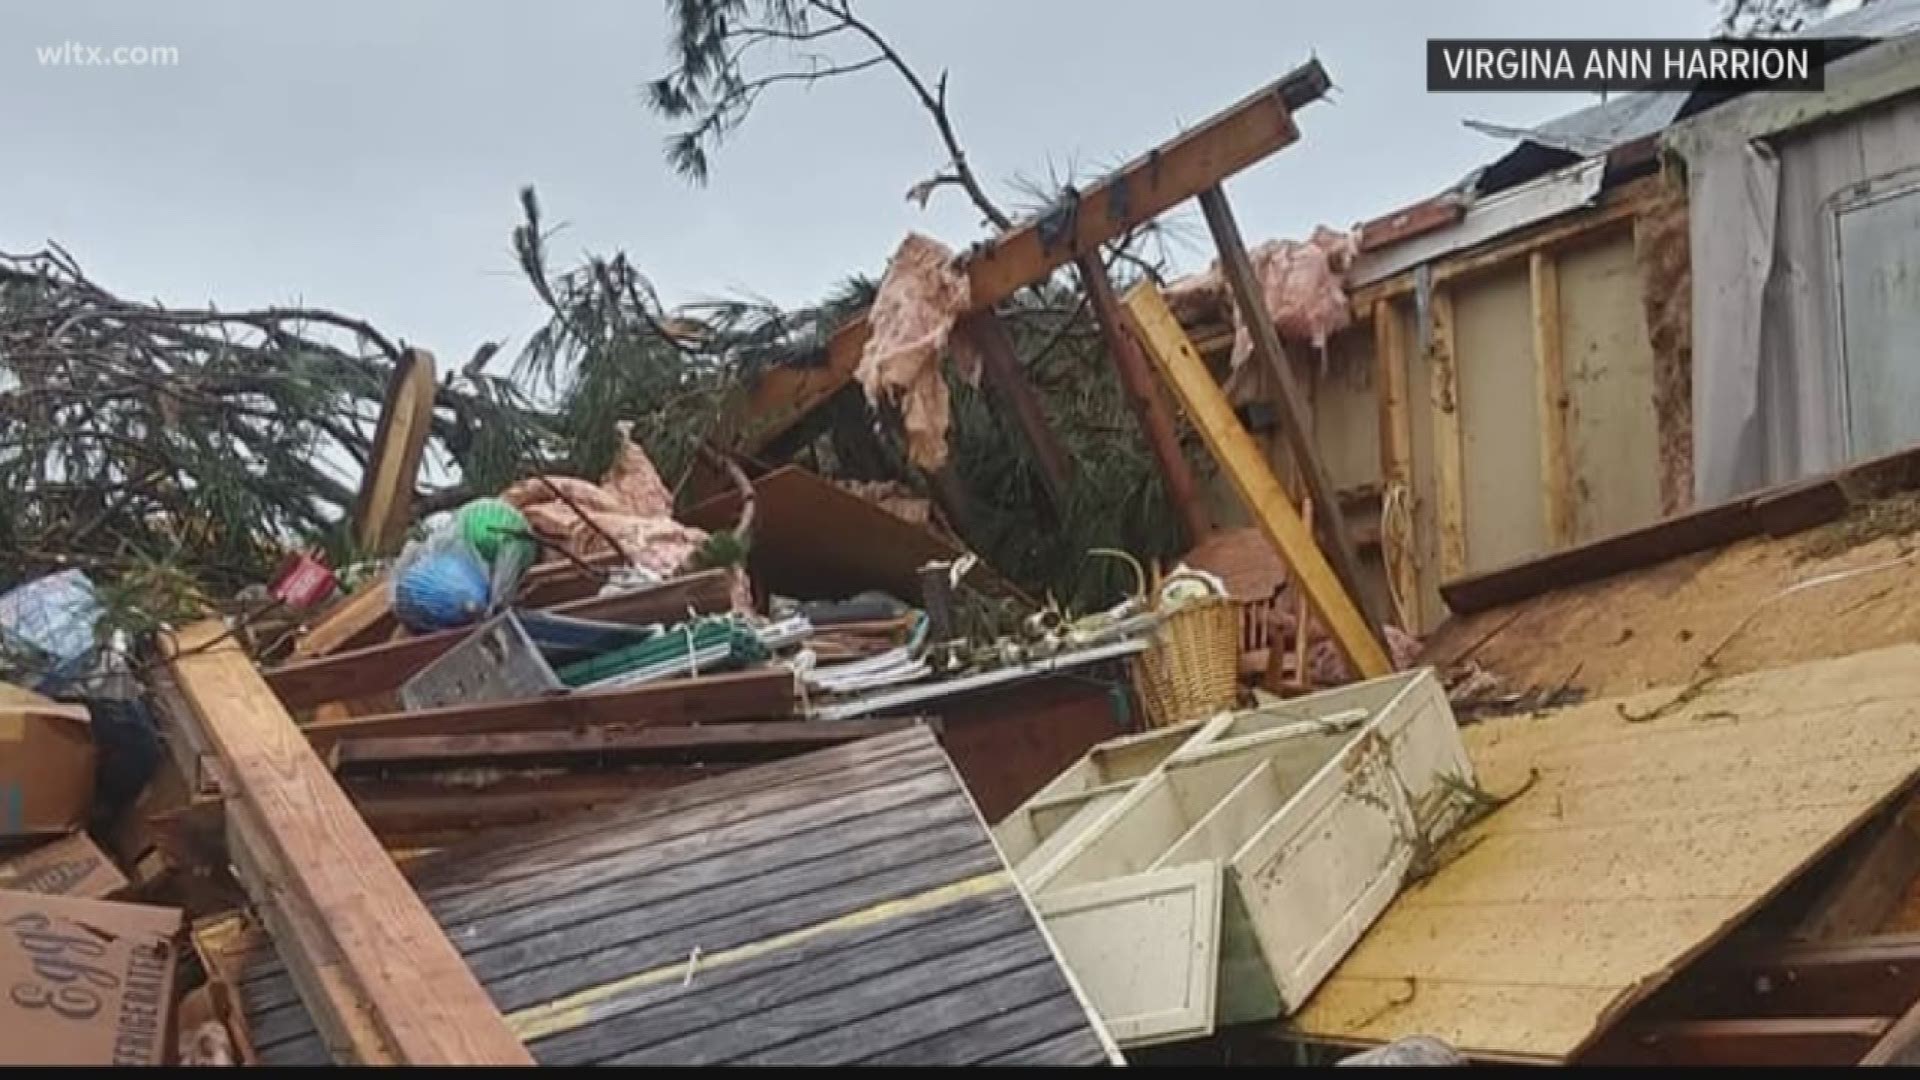 Clarendon county damage could be from a tornado, weather service crews will survey damage on Saturday